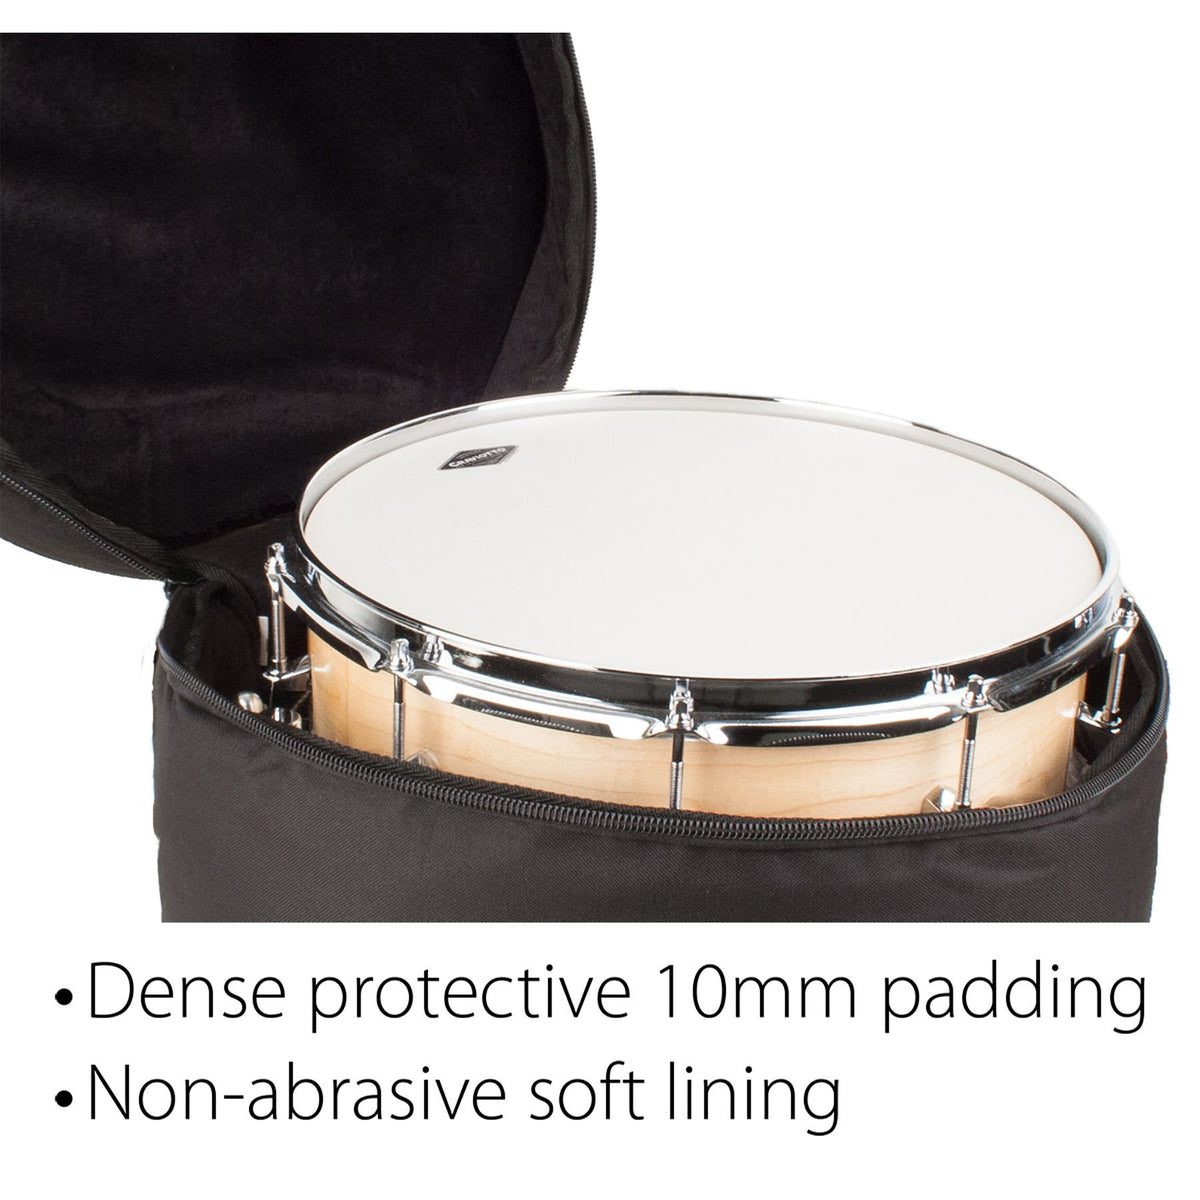 Protec - Padded Tom Bag 12â€³ X 14â€³ (Heavy Ready Series)-Percussion-Protec-Music Elements